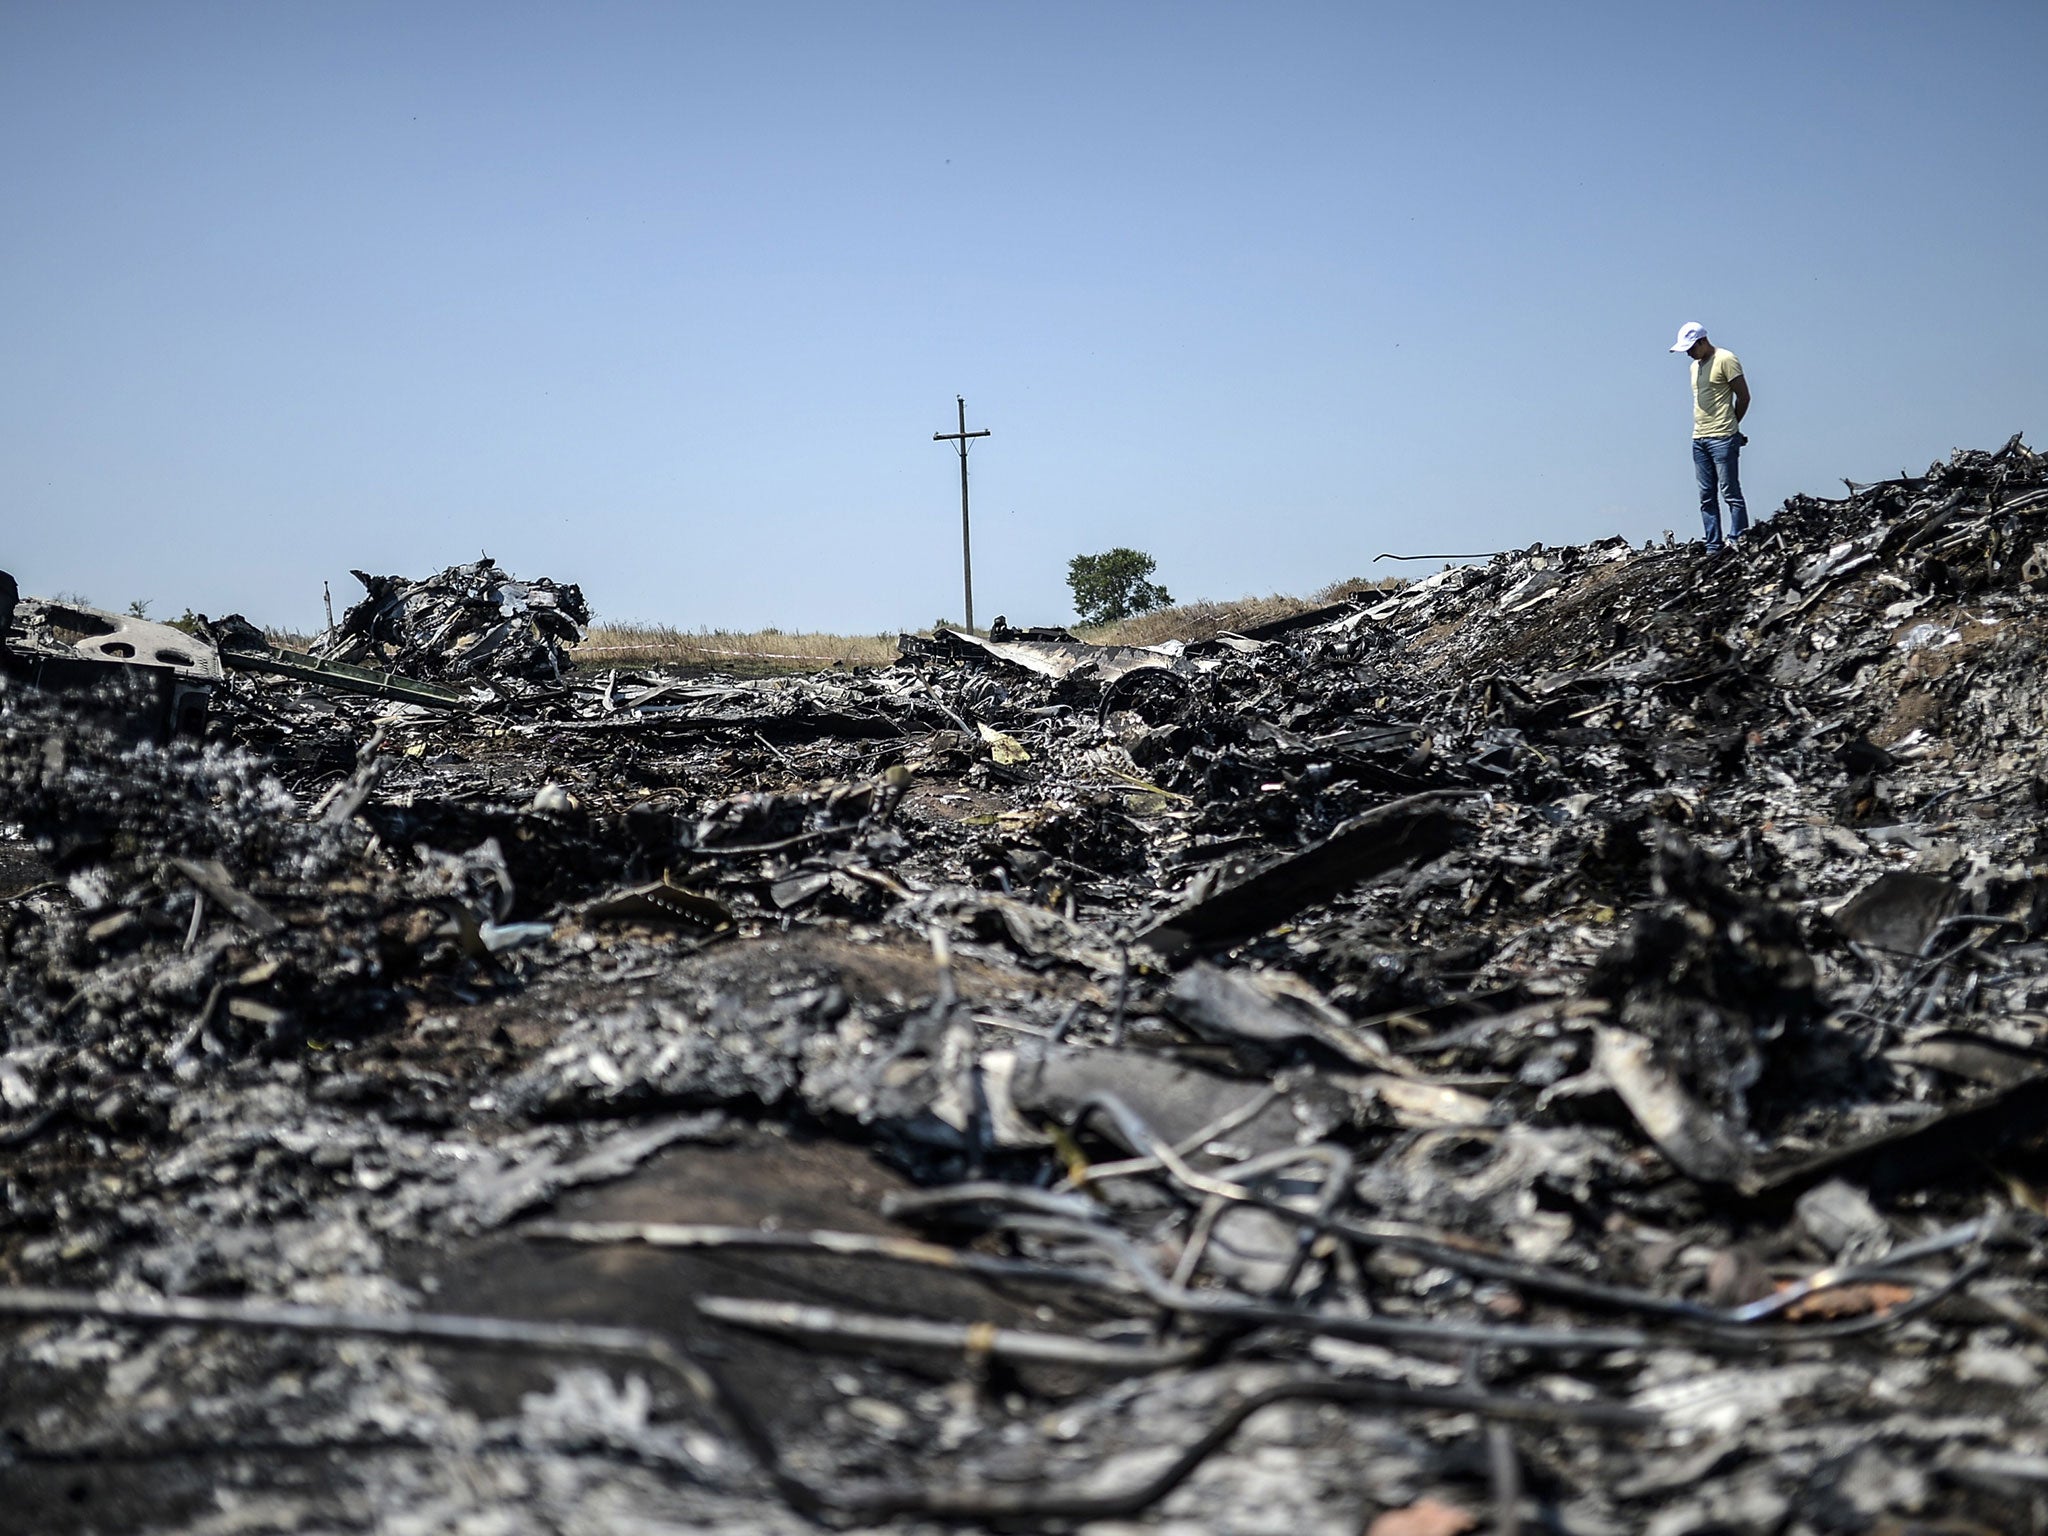 Investigators fear that the crash site has already been compromised